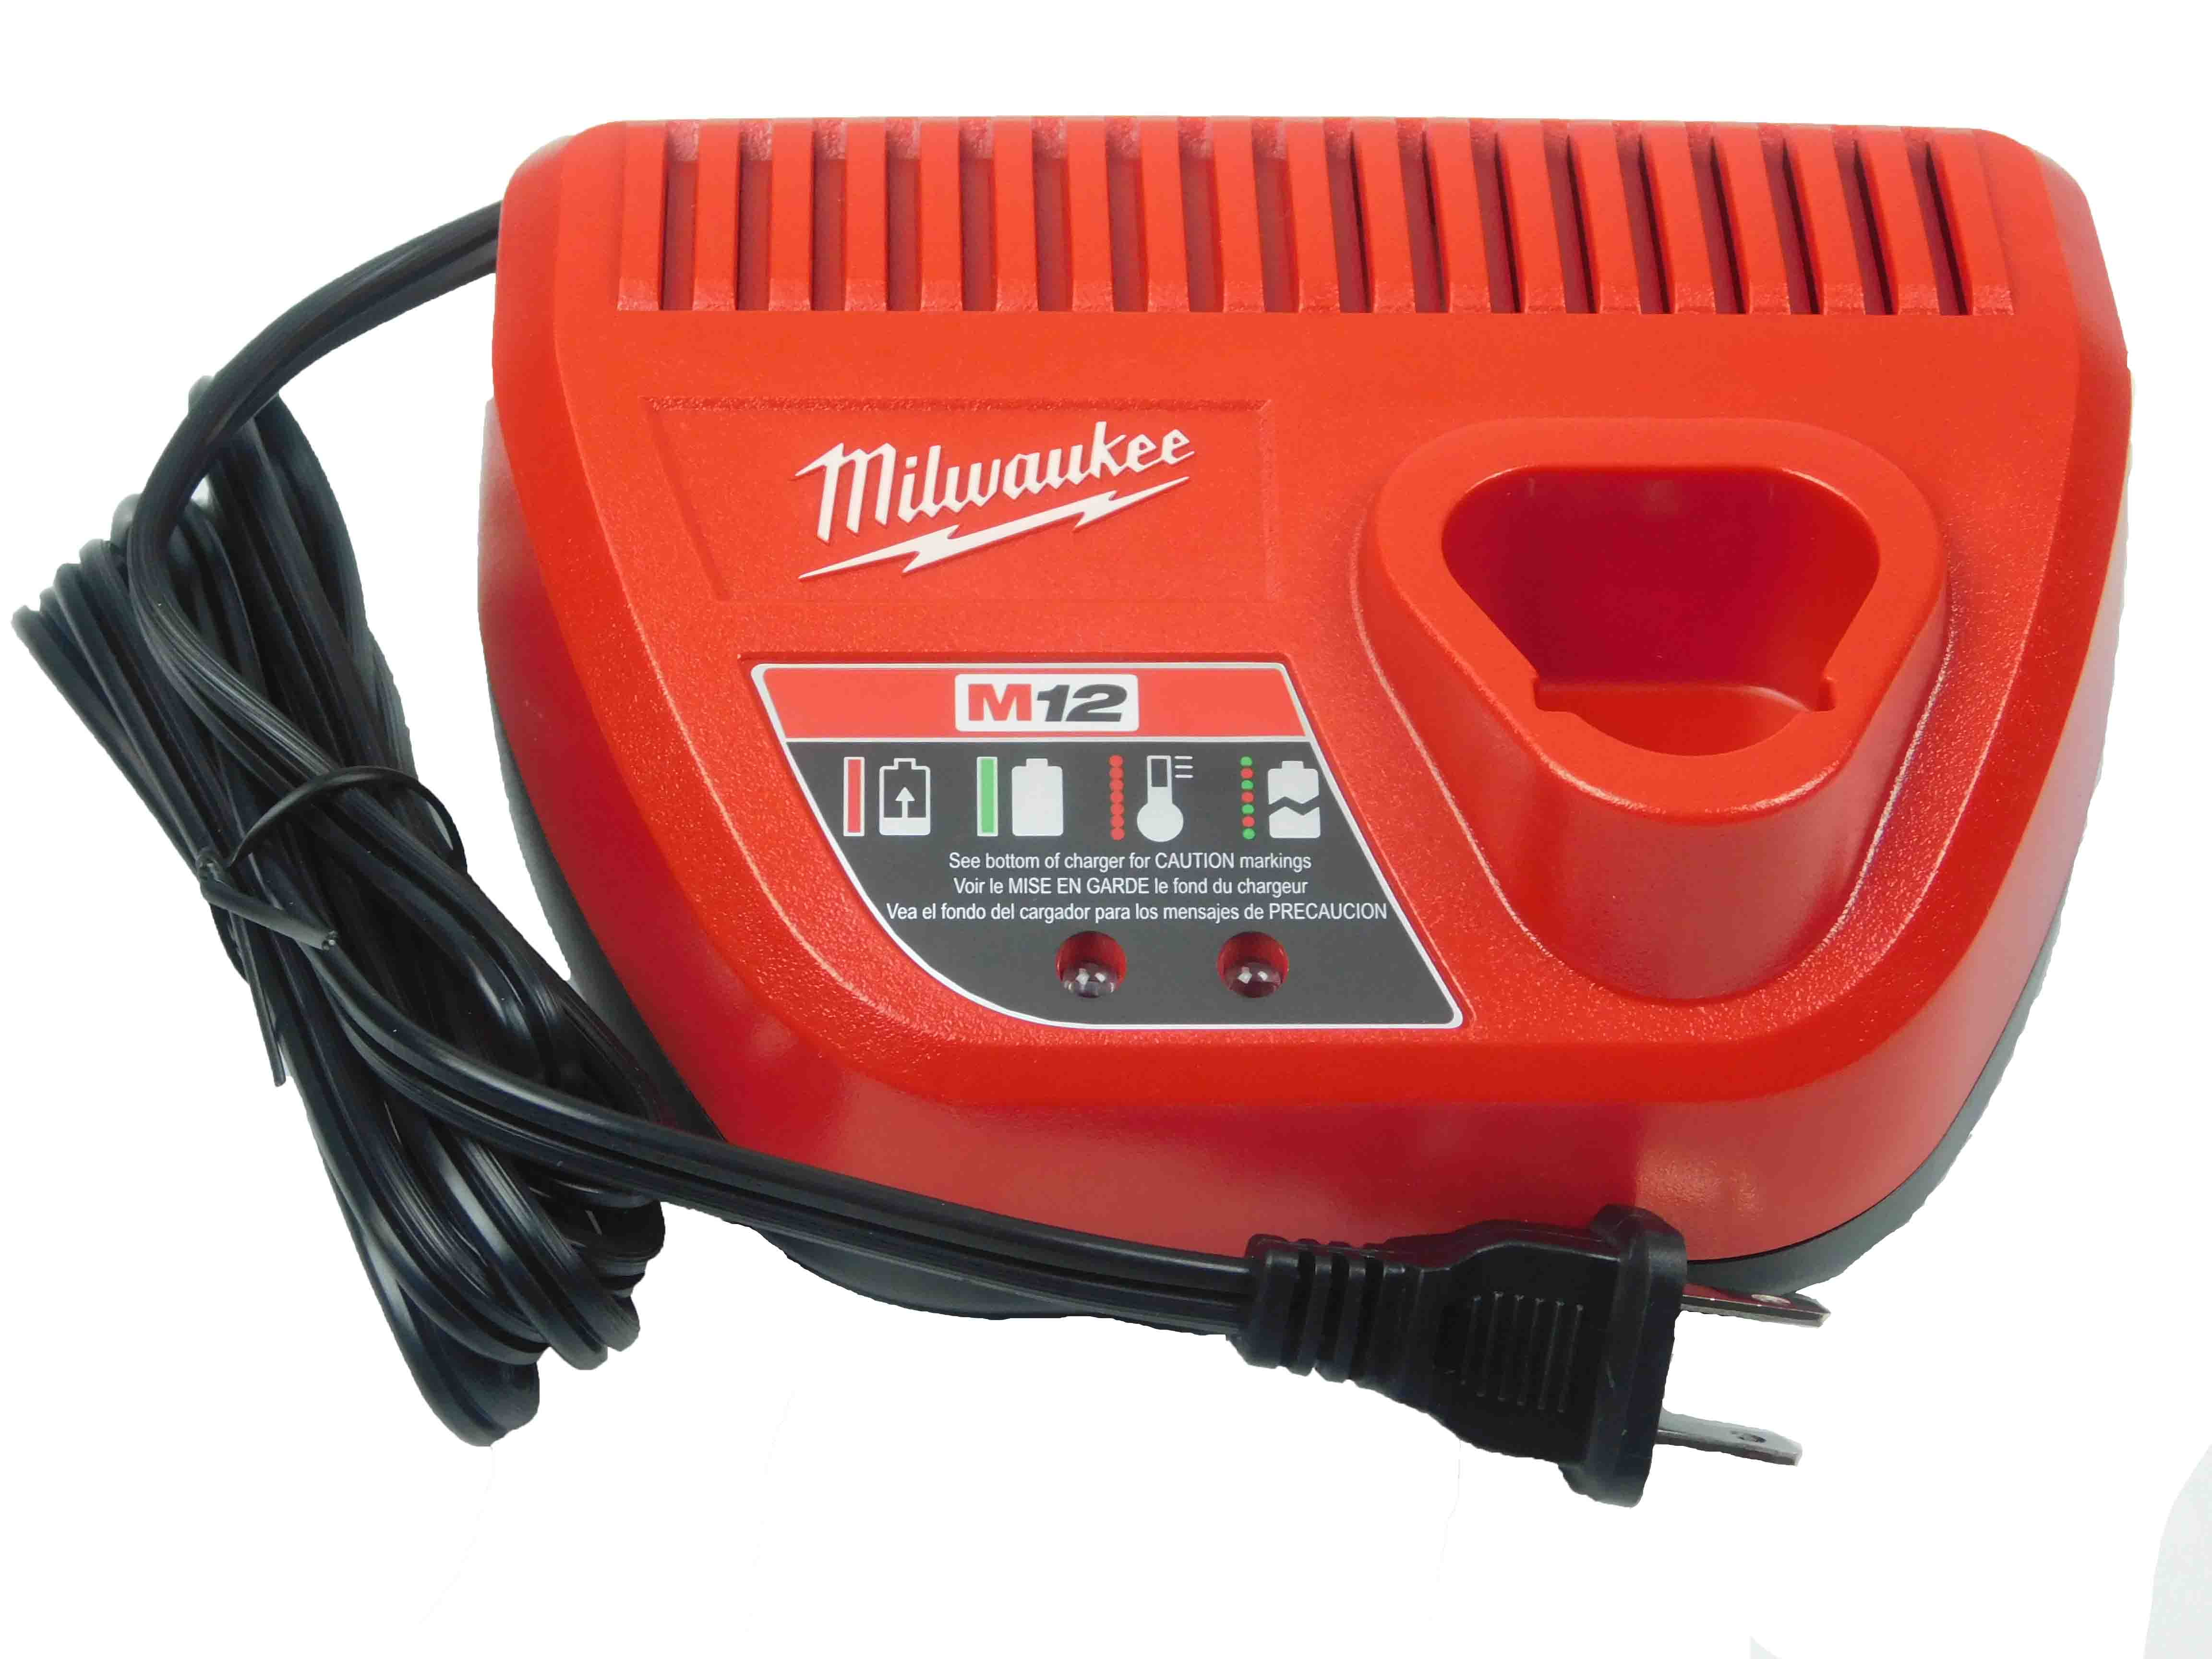 Milwaukee M12 12V Lithium-Ion Charger with Indicator Light 48-59-2401